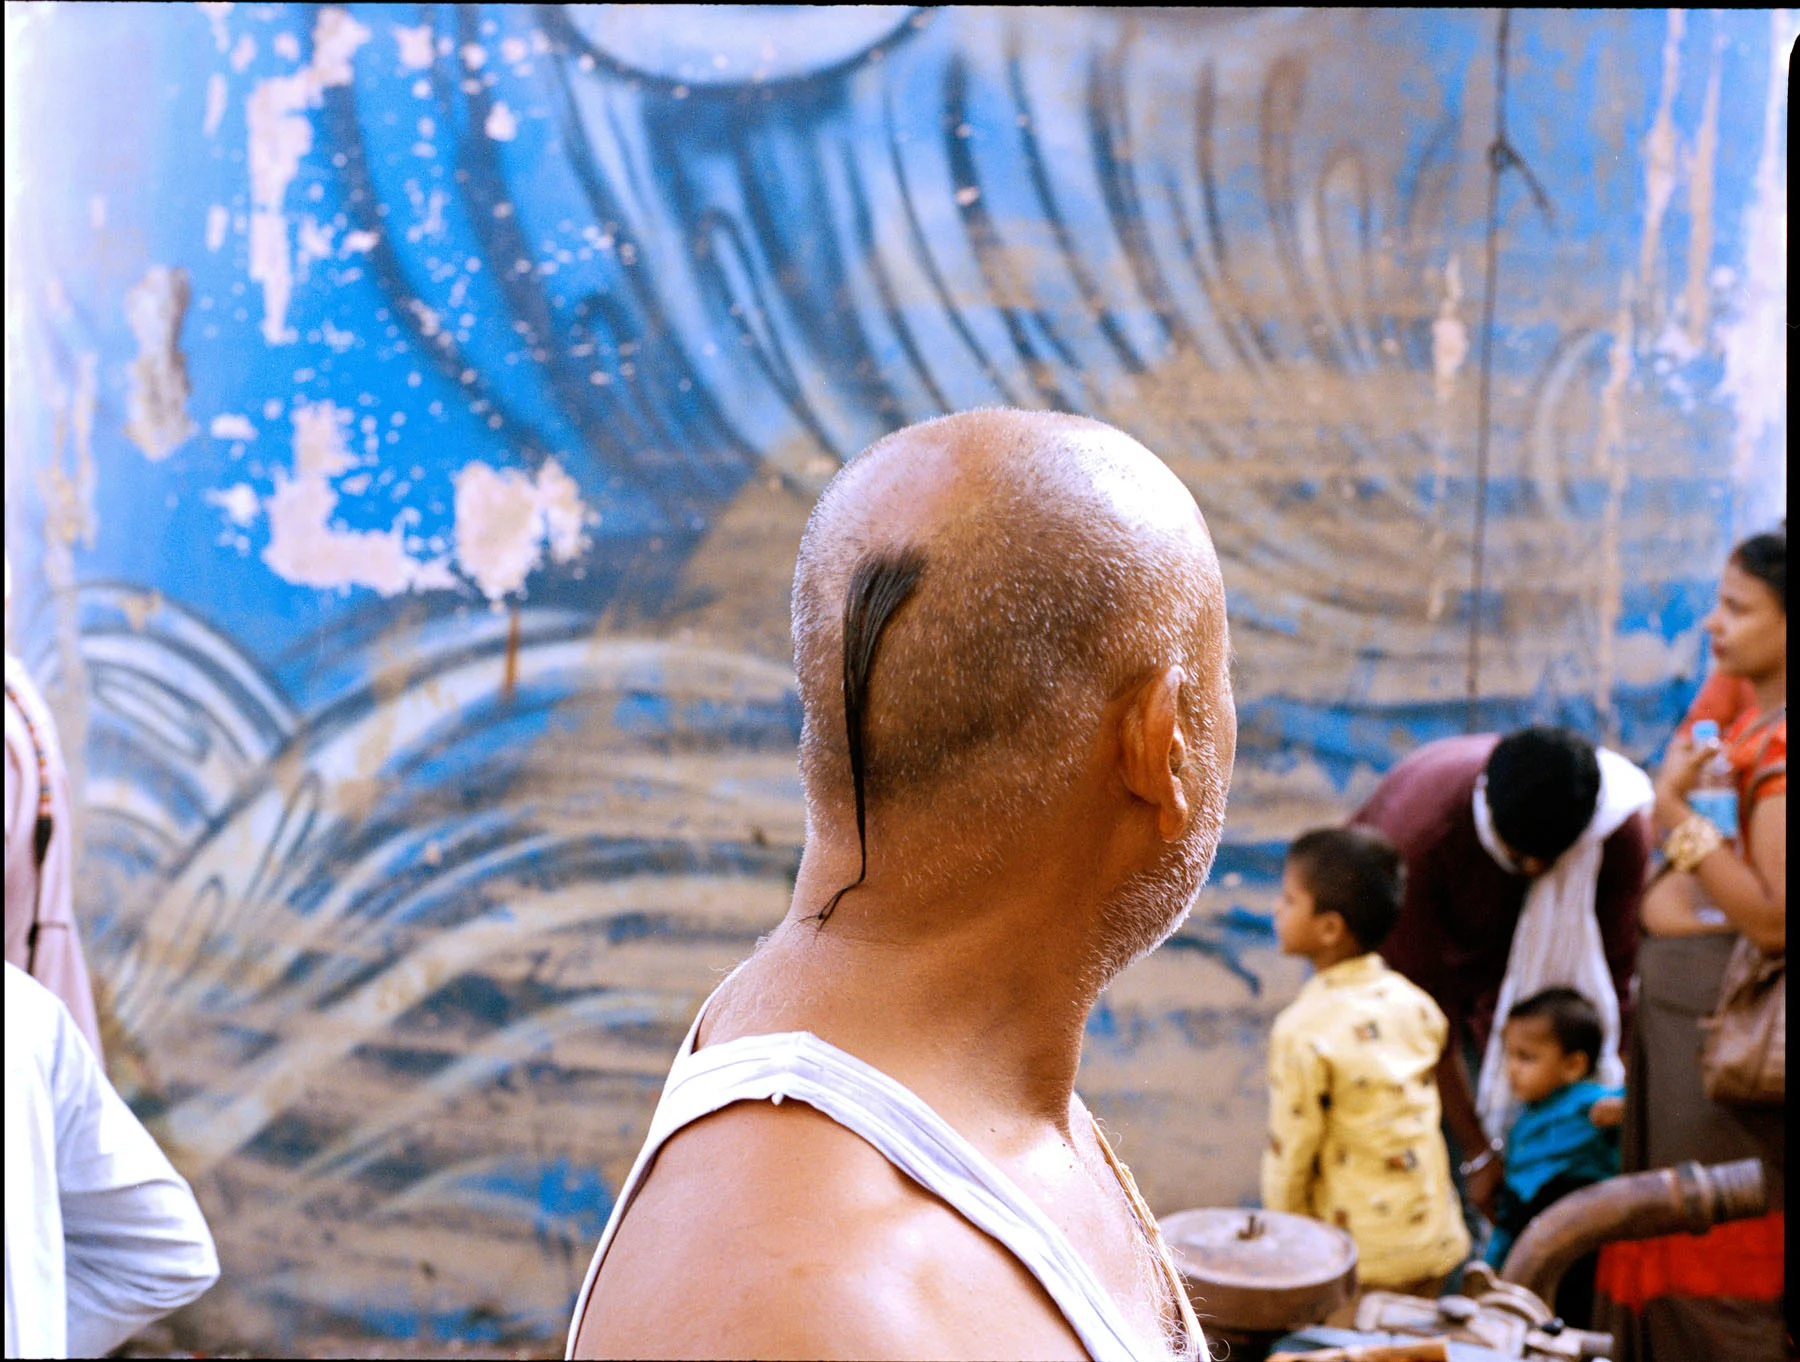 A photograph of a man from the ‘Brahmin’ community, with a tuft of hair (referred as ‘shikha’) on the back of his head.